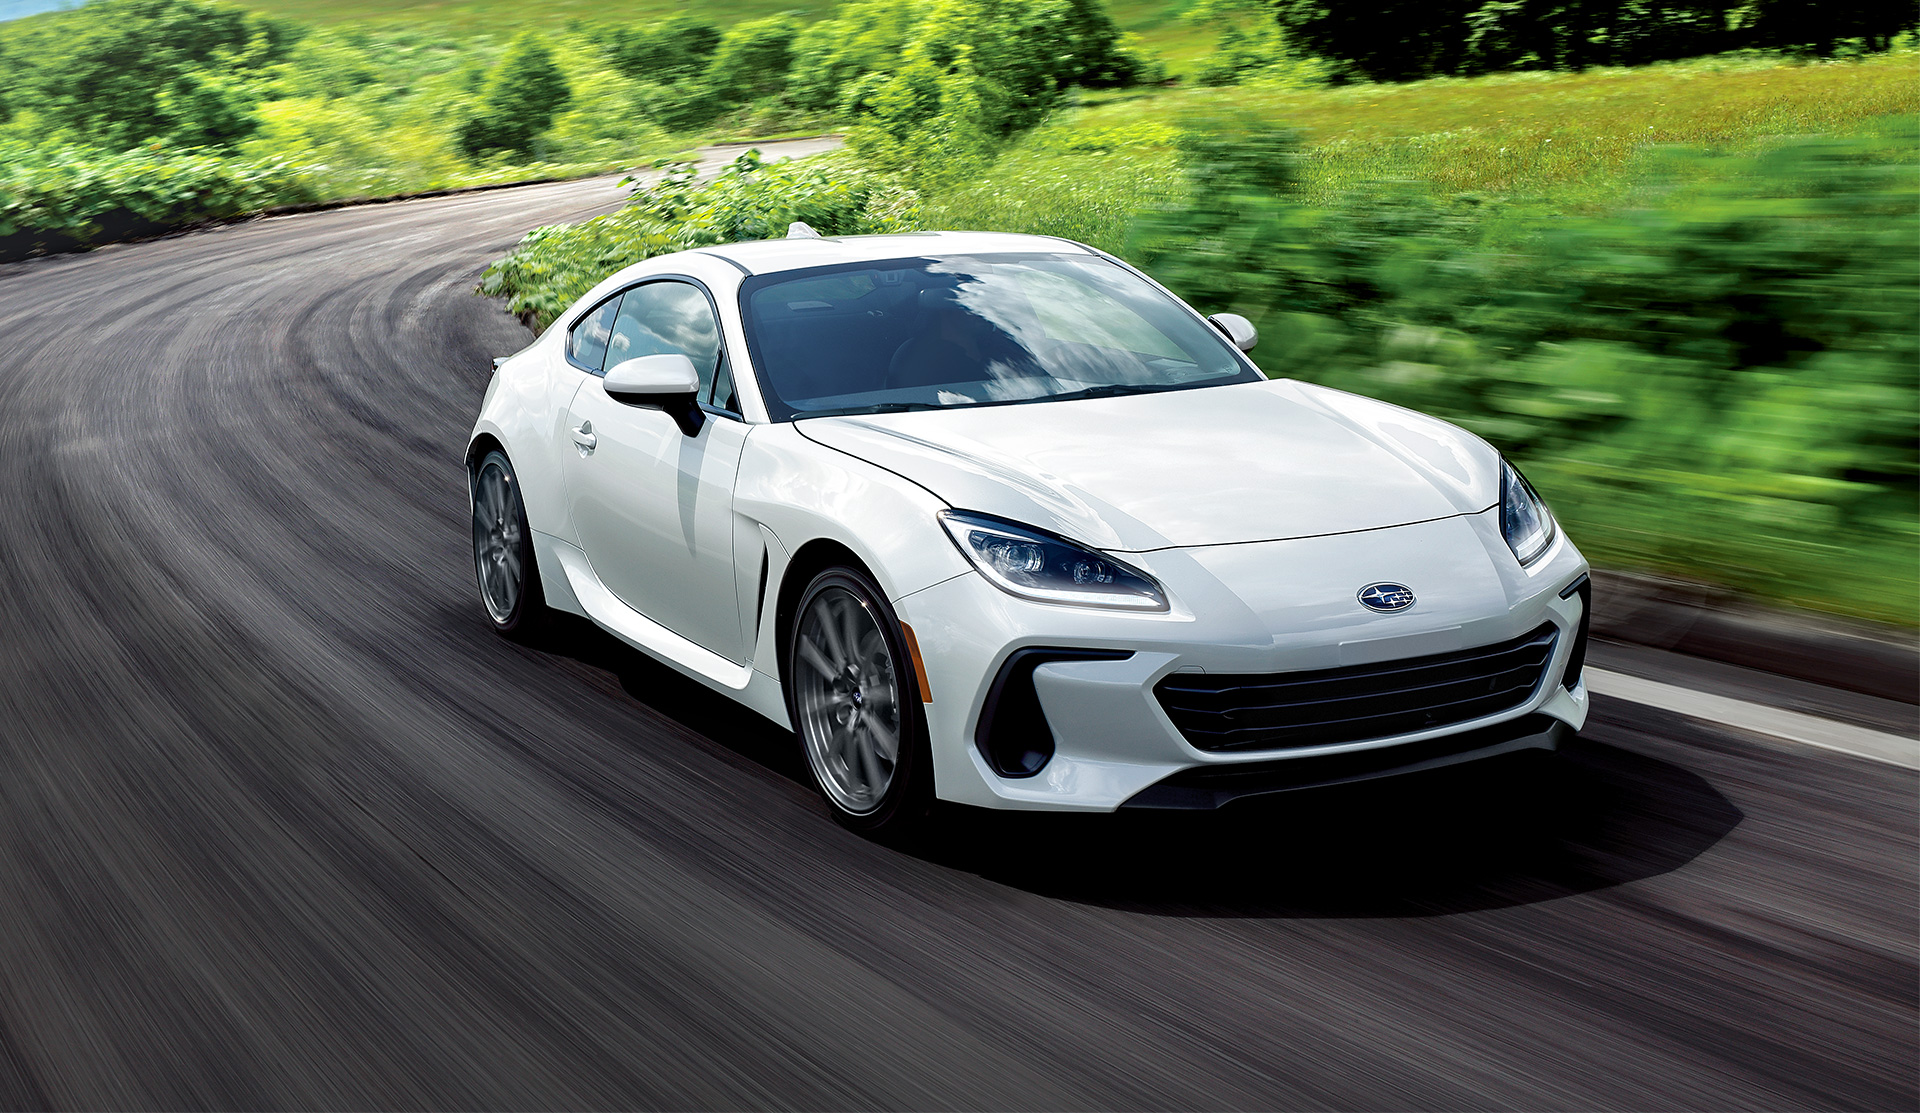 2024 BRZ moving fast around a curve on a country road.